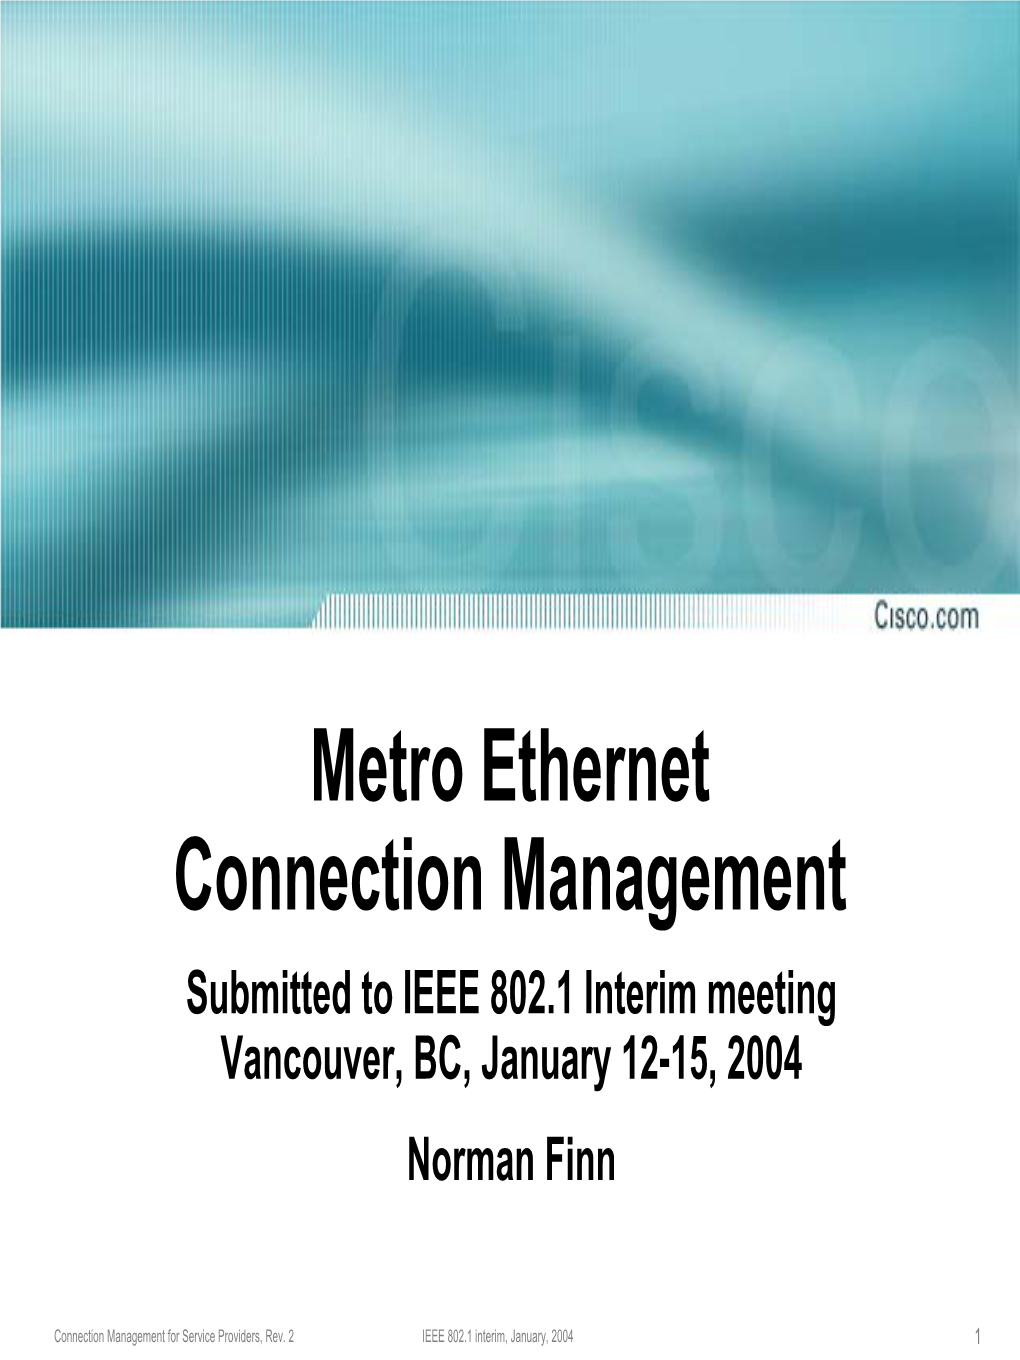 Metro Ethernet Connection Management Submitted to IEEE 802.1 Interim Meeting Vancouver, BC, January 12-15, 2004 Norman Finn